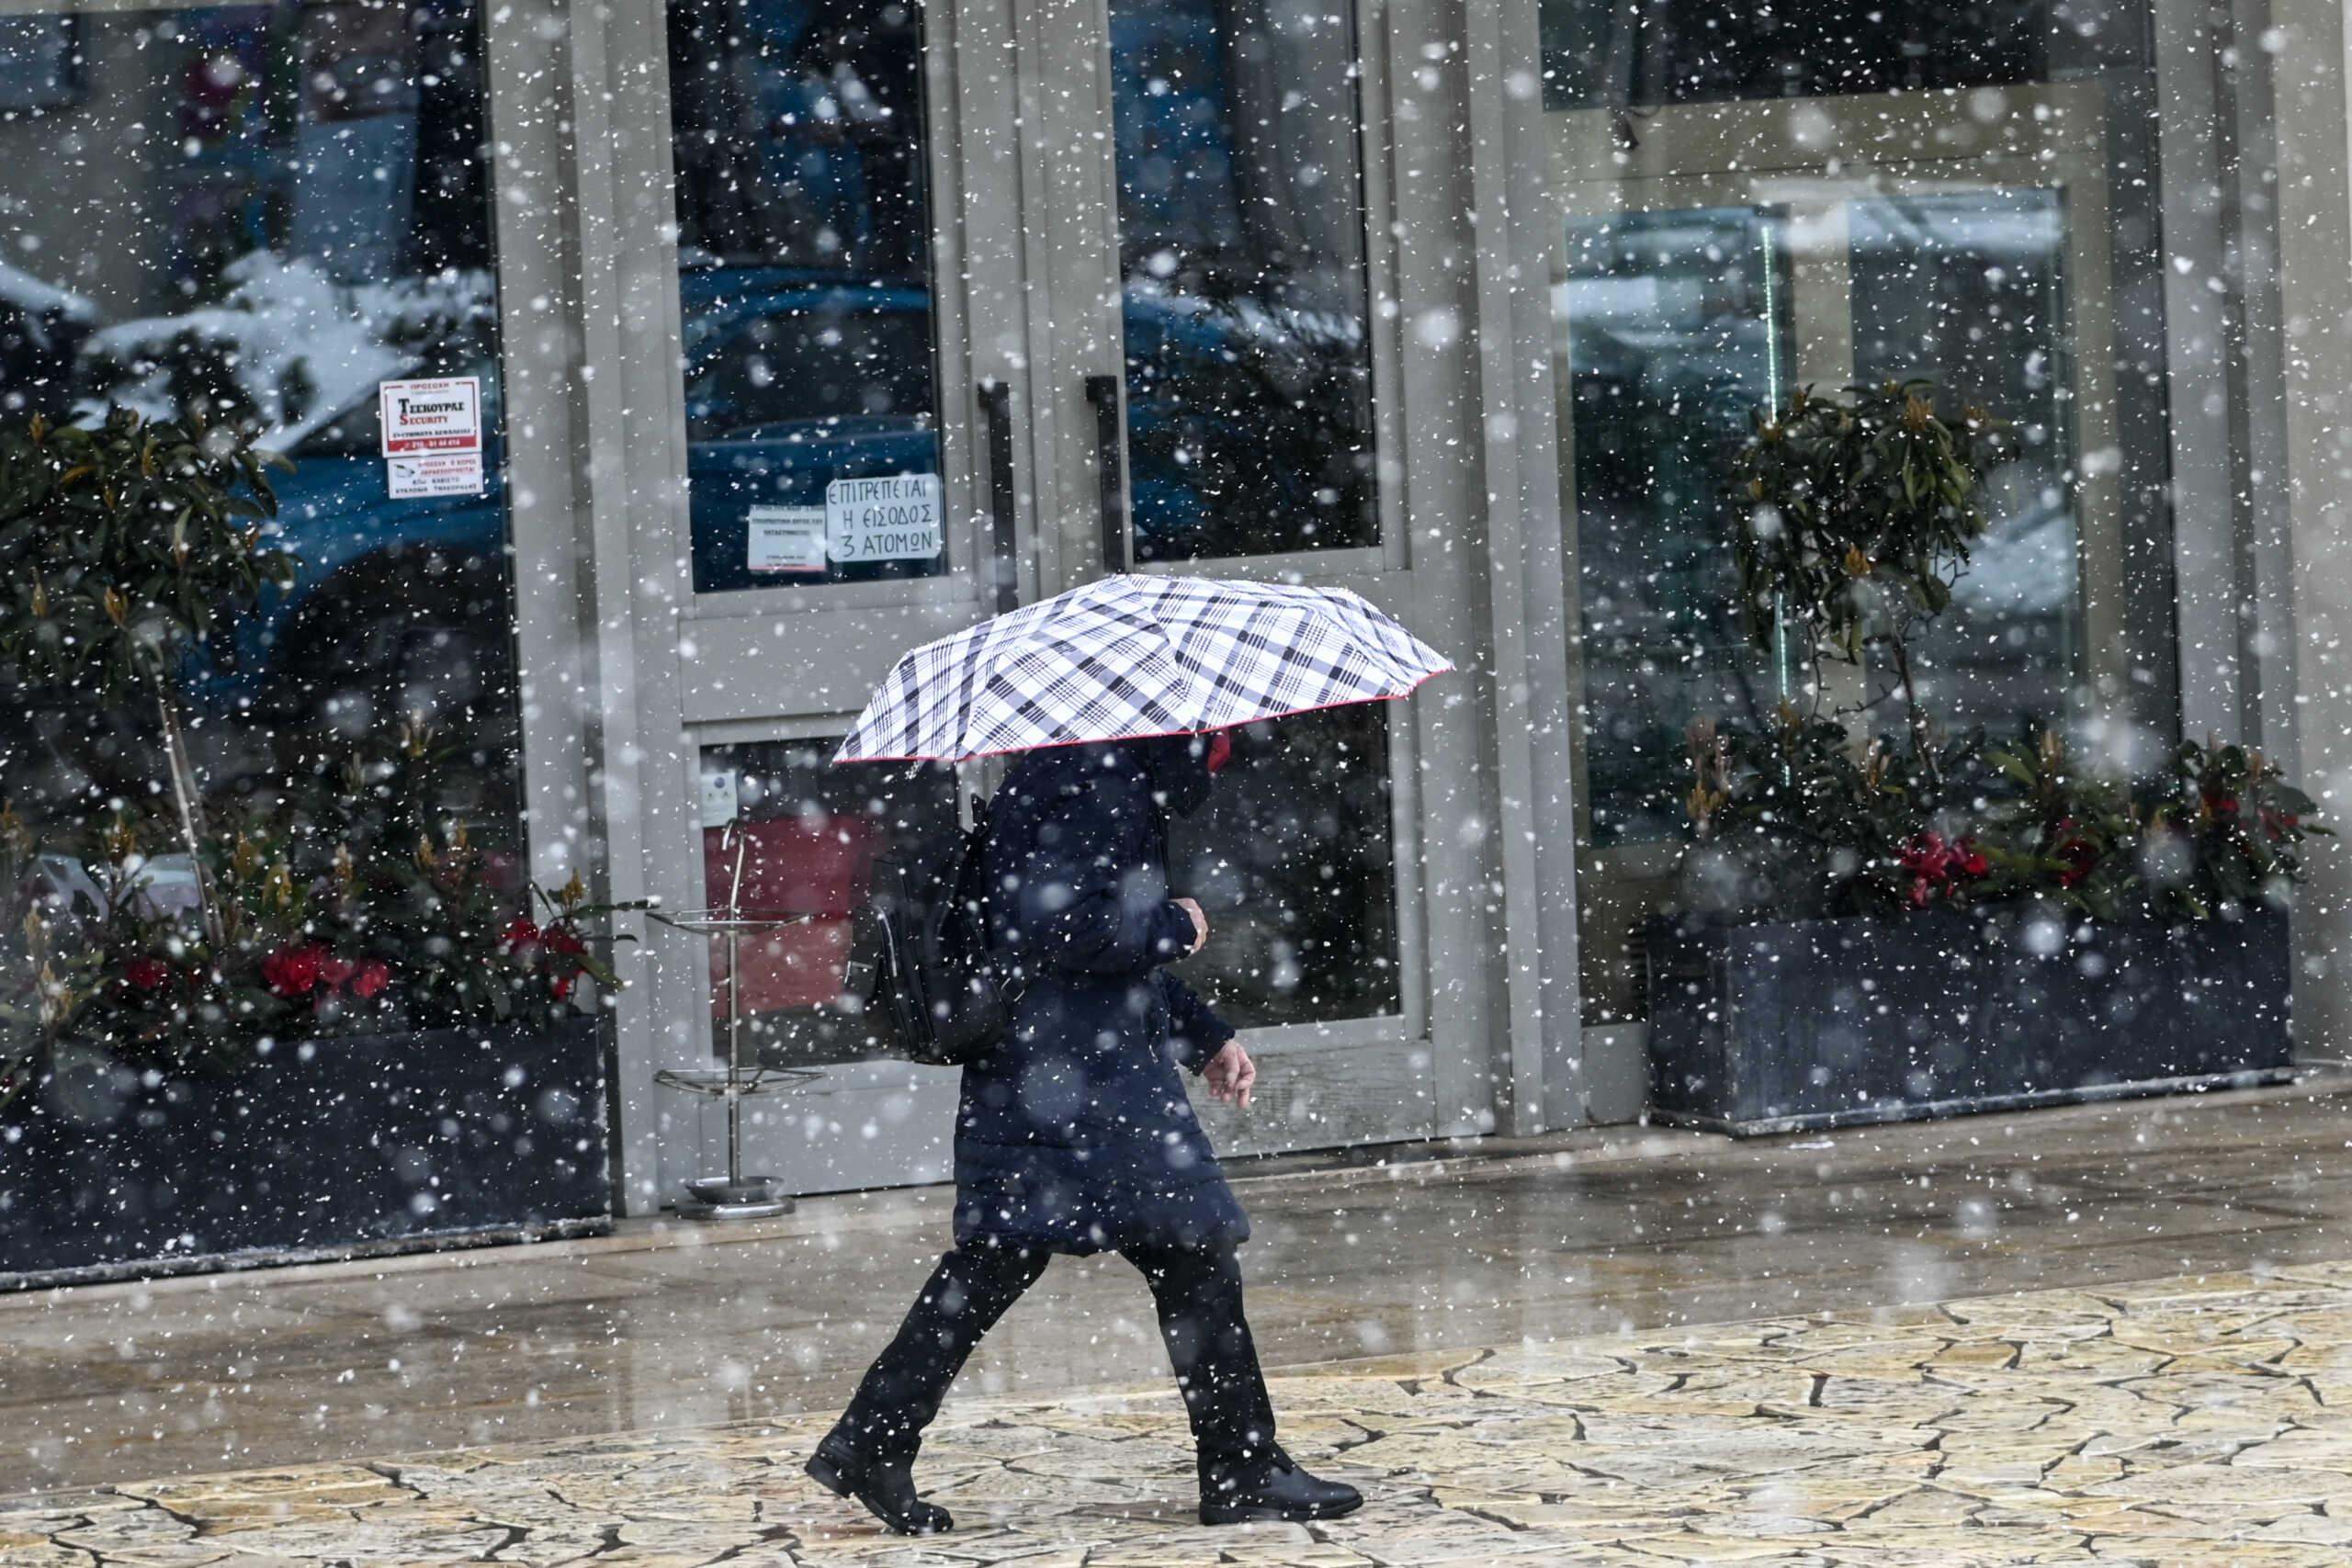 Bad weather across the country with rain and snow